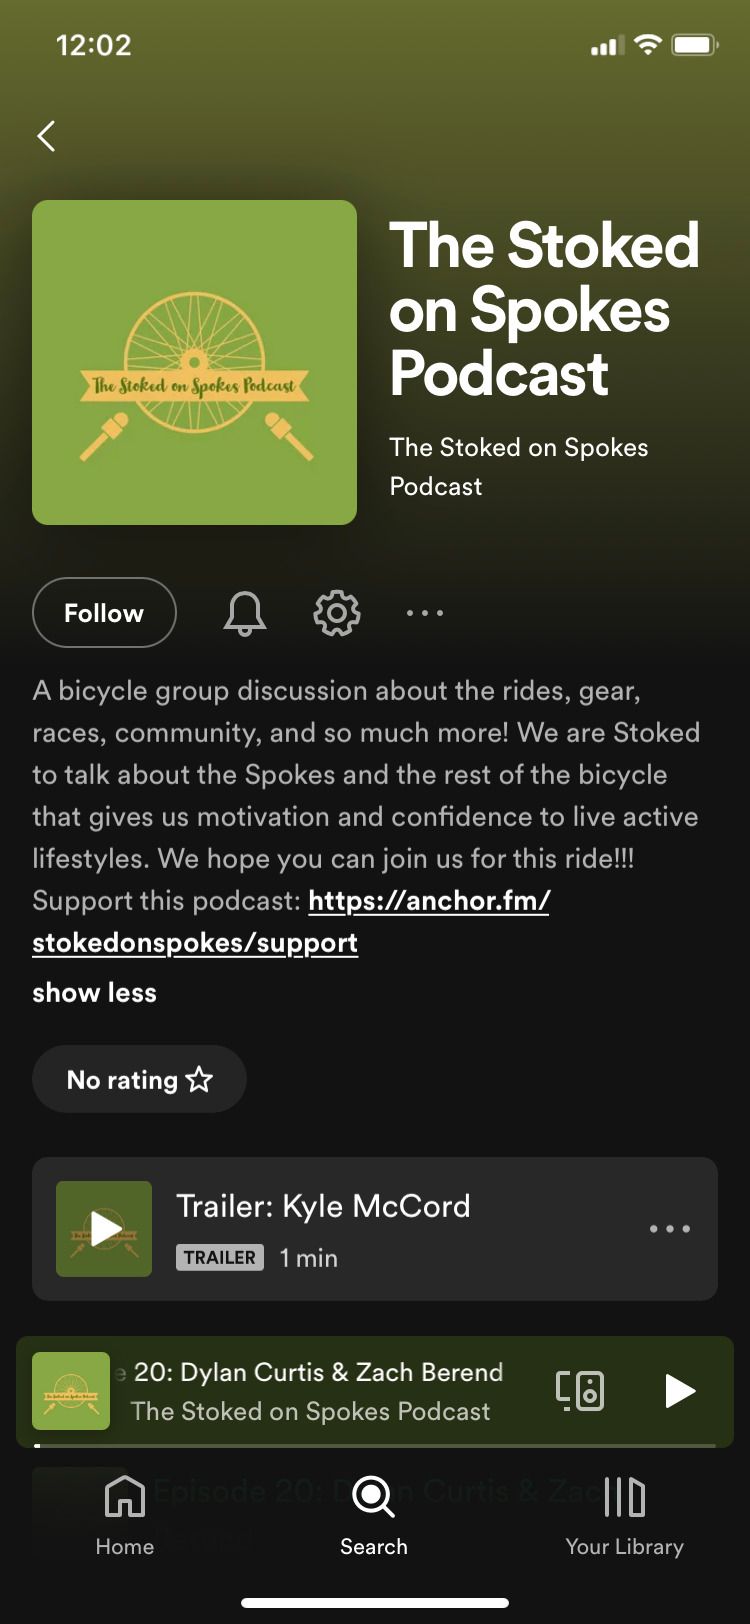 The Stoked on Spokes Podcast main screen